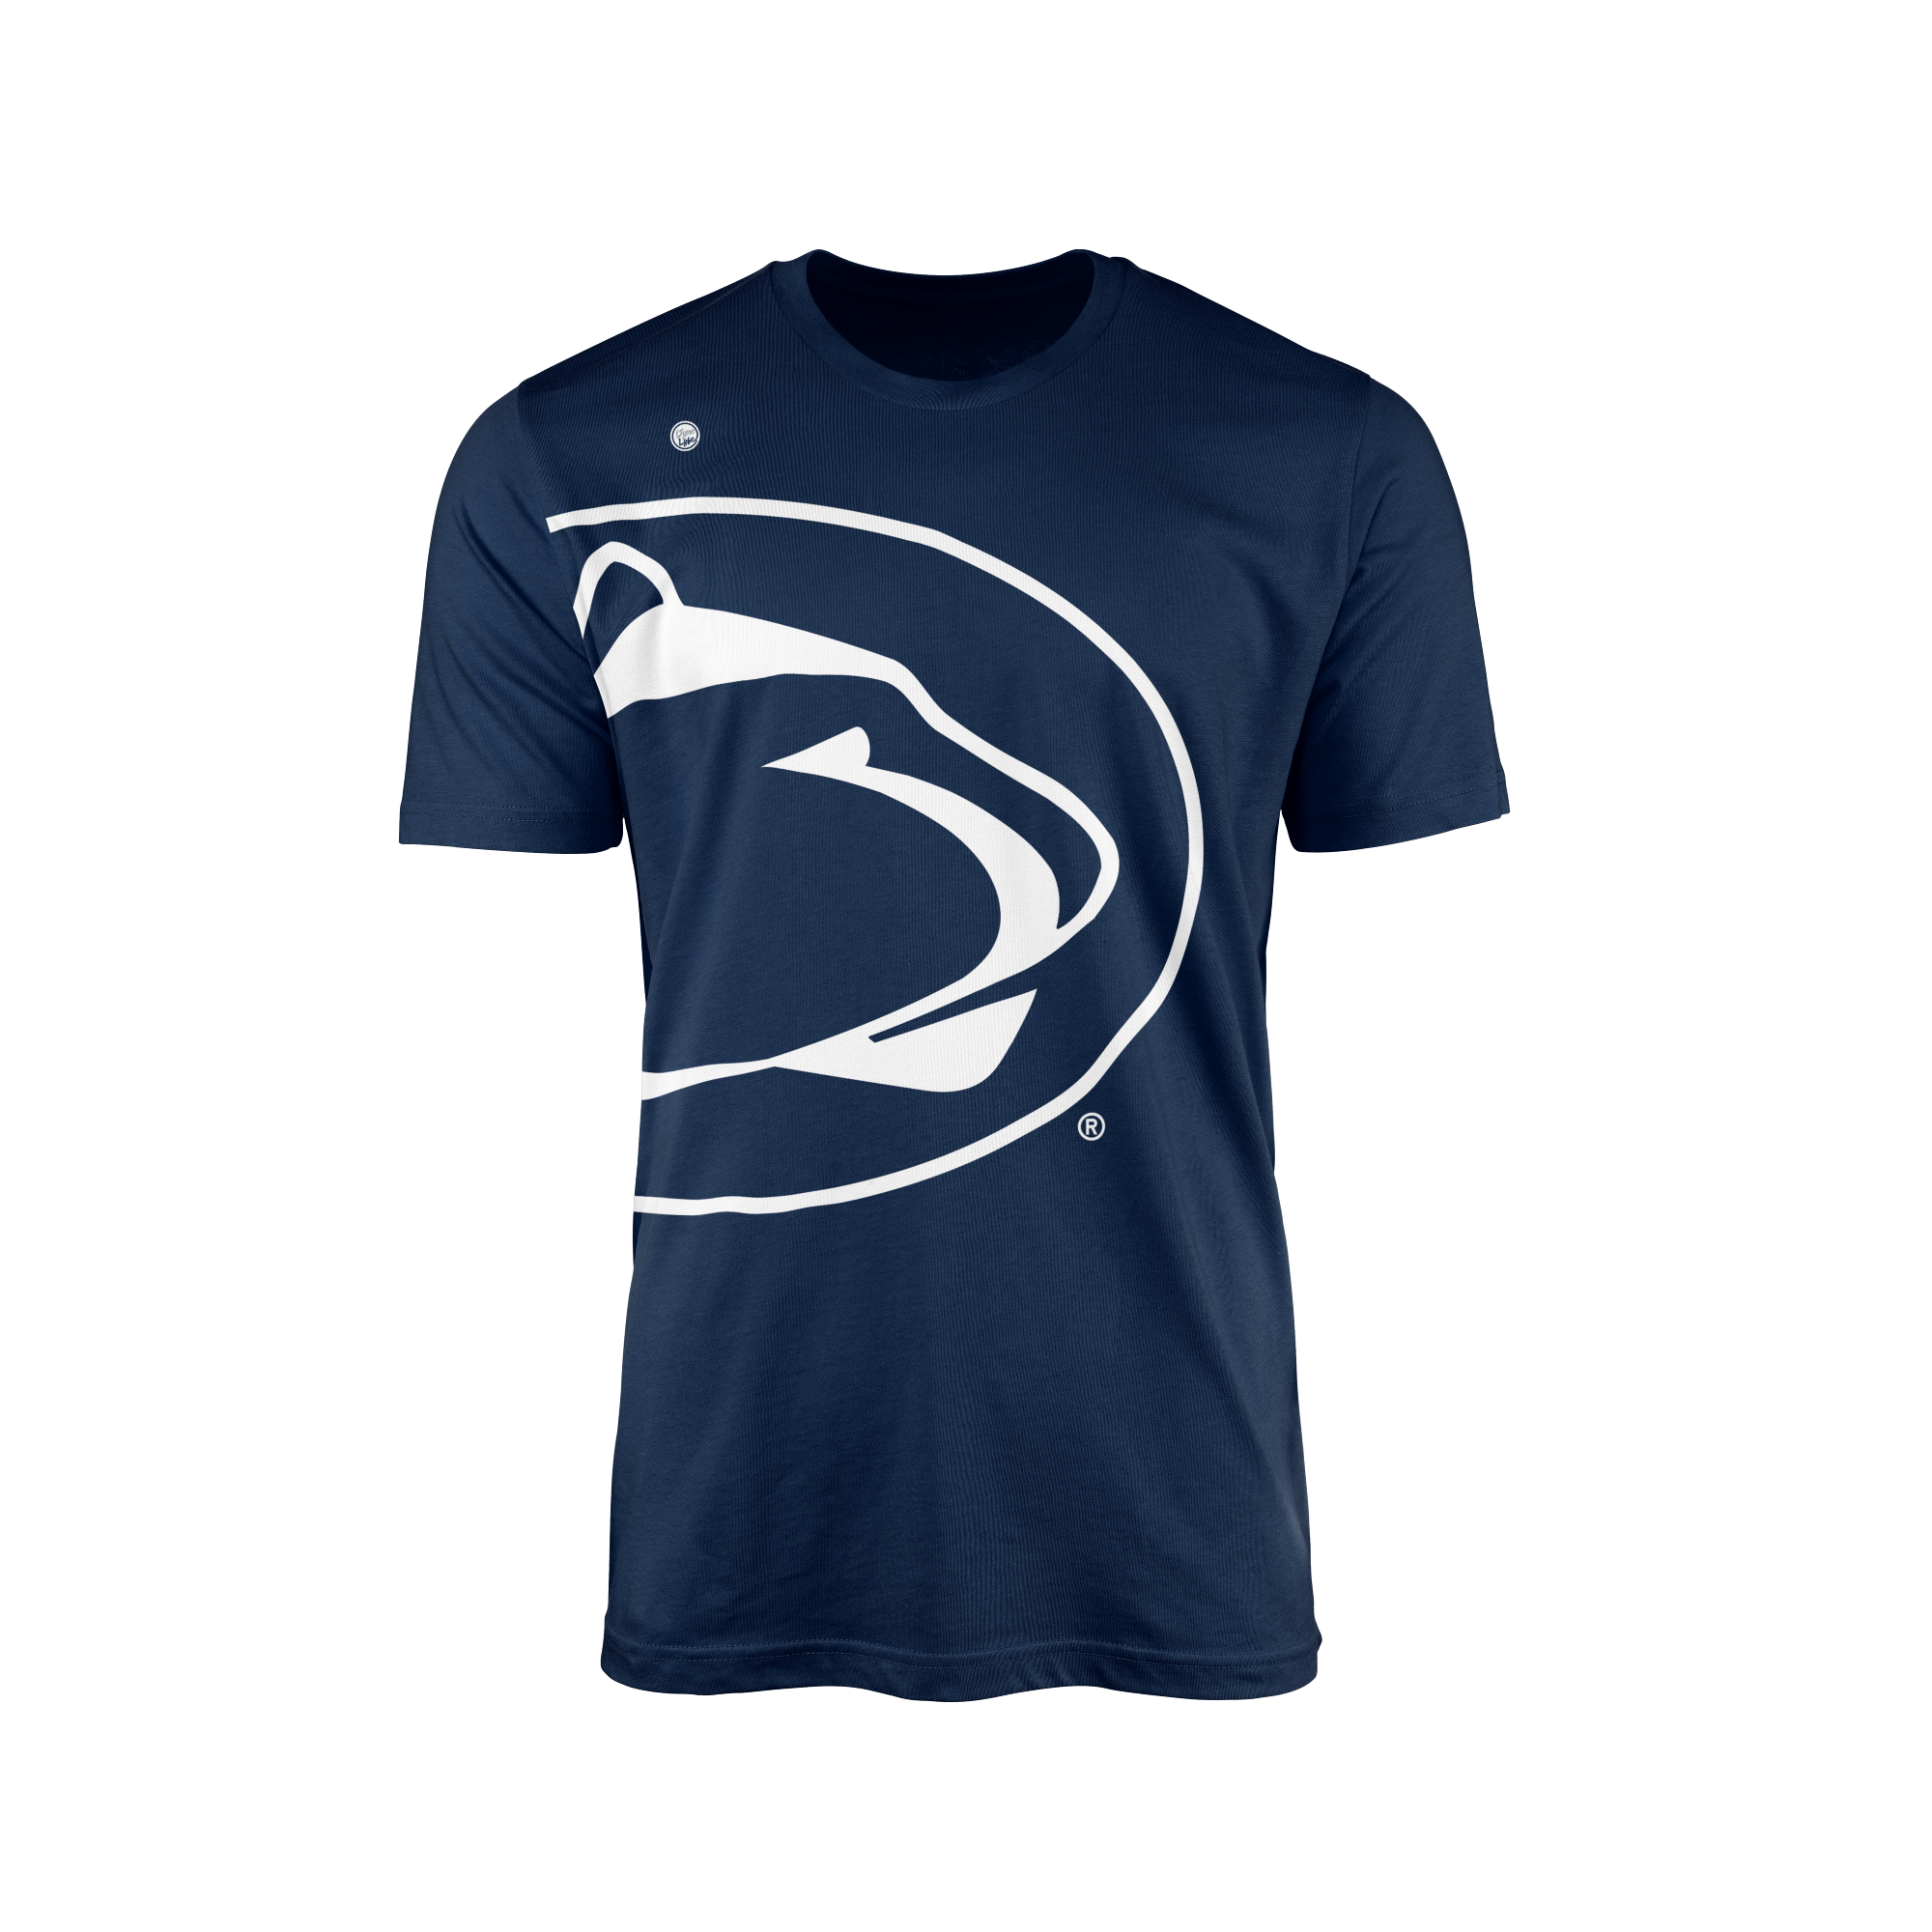 Big Penn State Nittany Lions Tee - Navy Blue